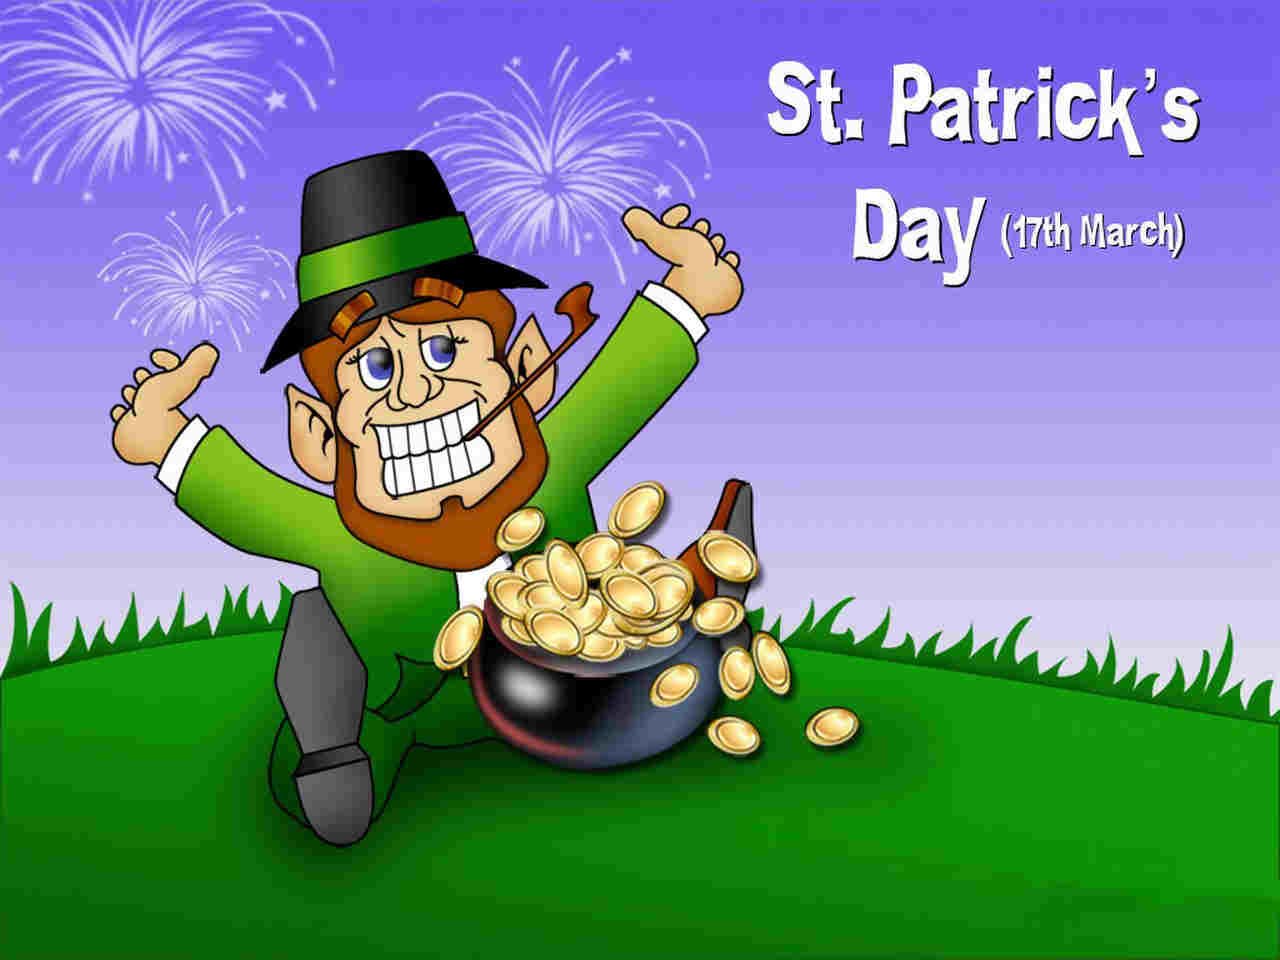 Image ID: 6765. st patrick's day Leprechaun and pot of gold Holiday St...